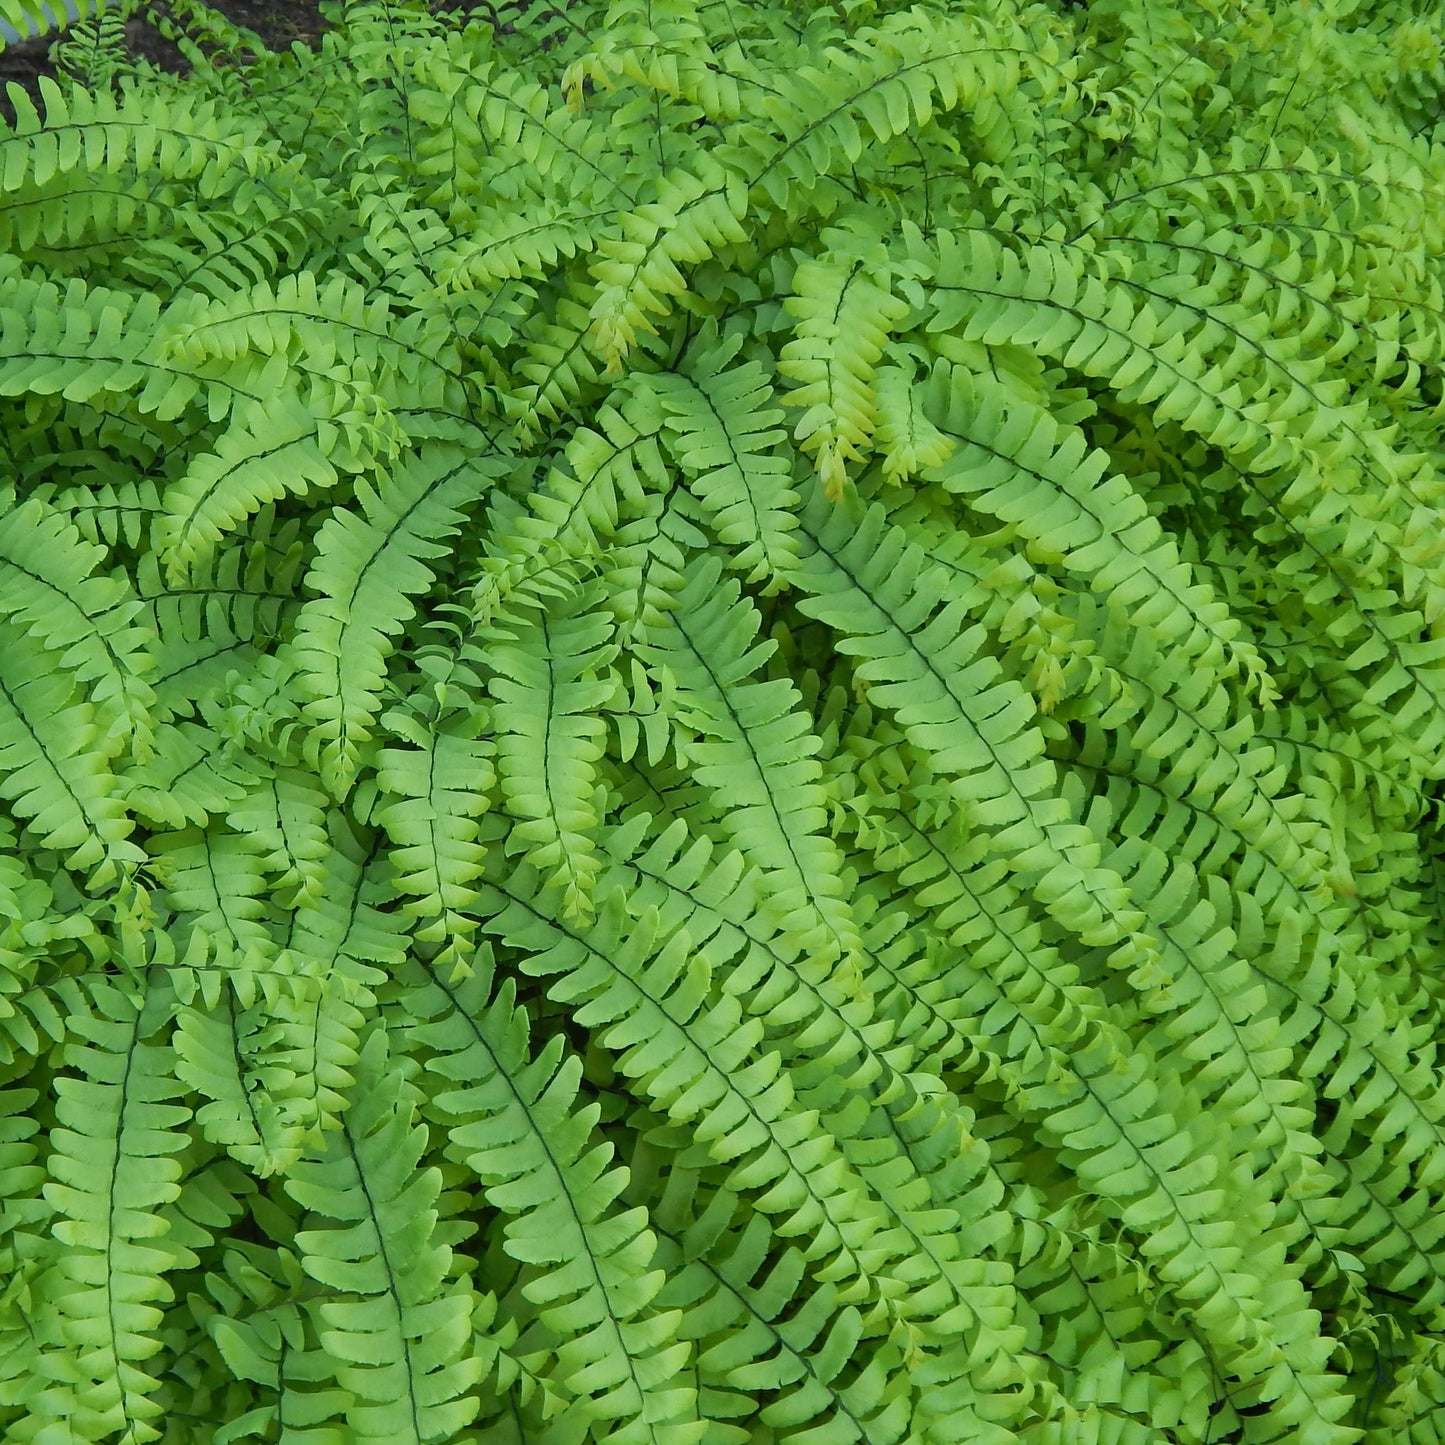 Northern maidenhair fern (Adiantum pedatum) Delicate emerald green fronds with black stems make this distinctive fern an excellent addition to a shady landscape.